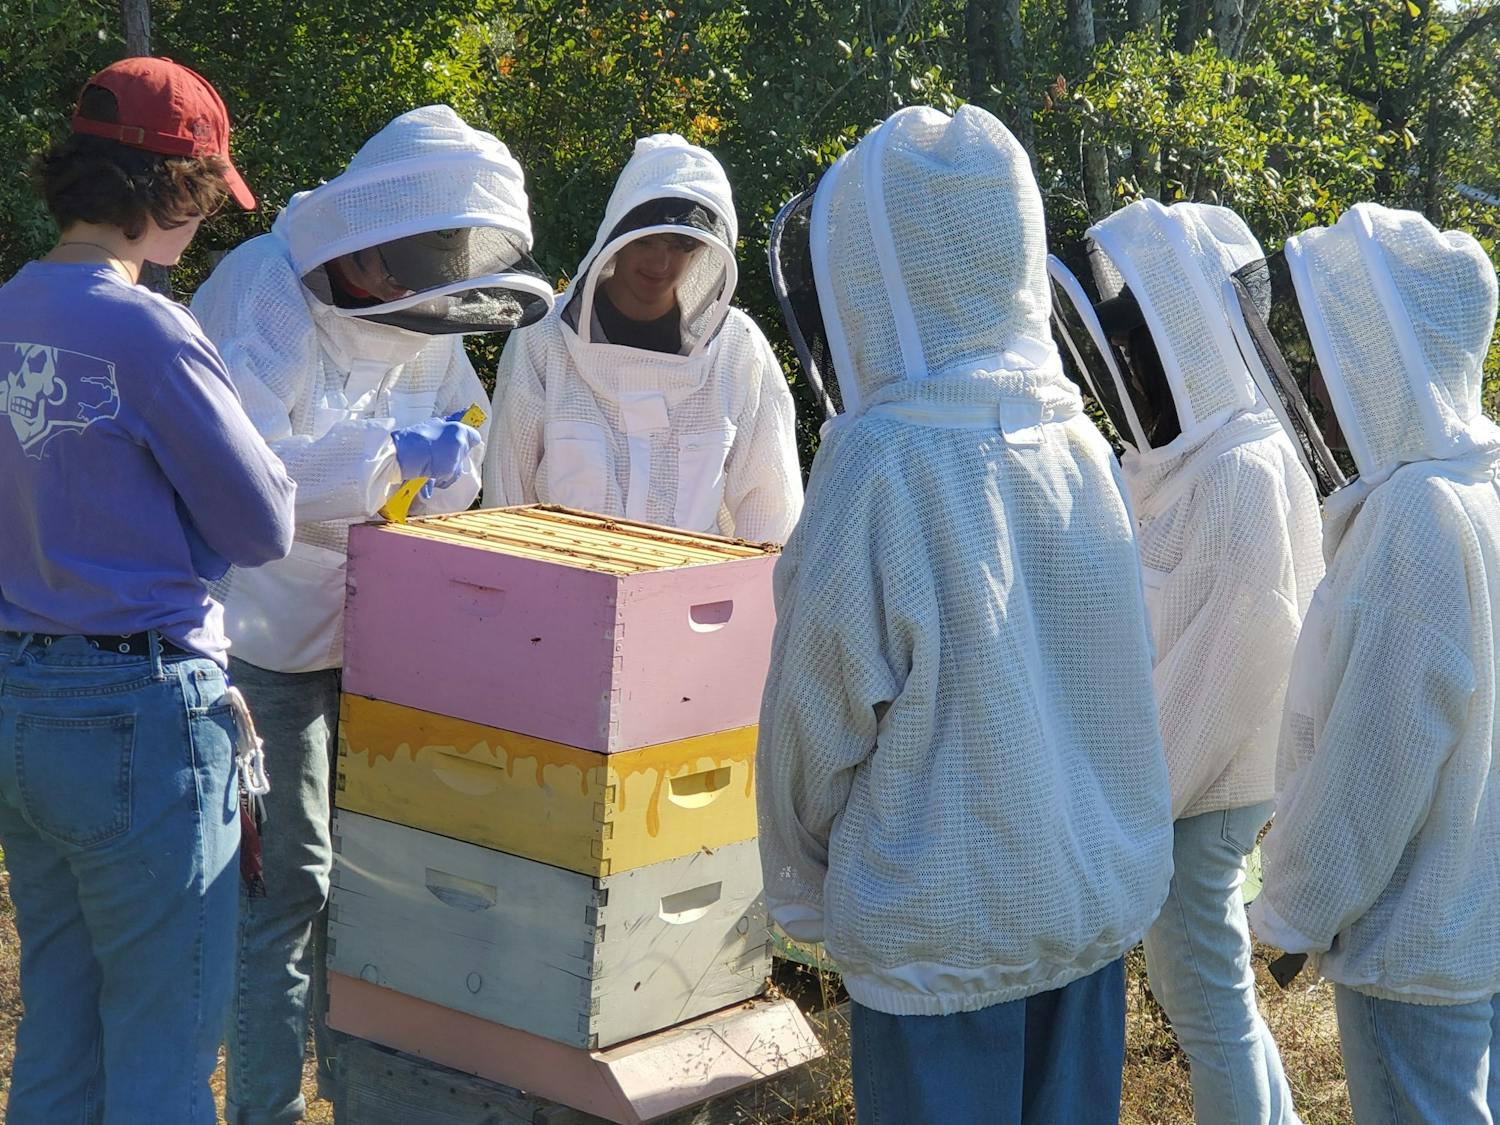 The Carolina Beekeeping Club crowd around beehives in their beesuits. The club is open to all USC students and faculty who share a passion for “protecting our pollinators.” 